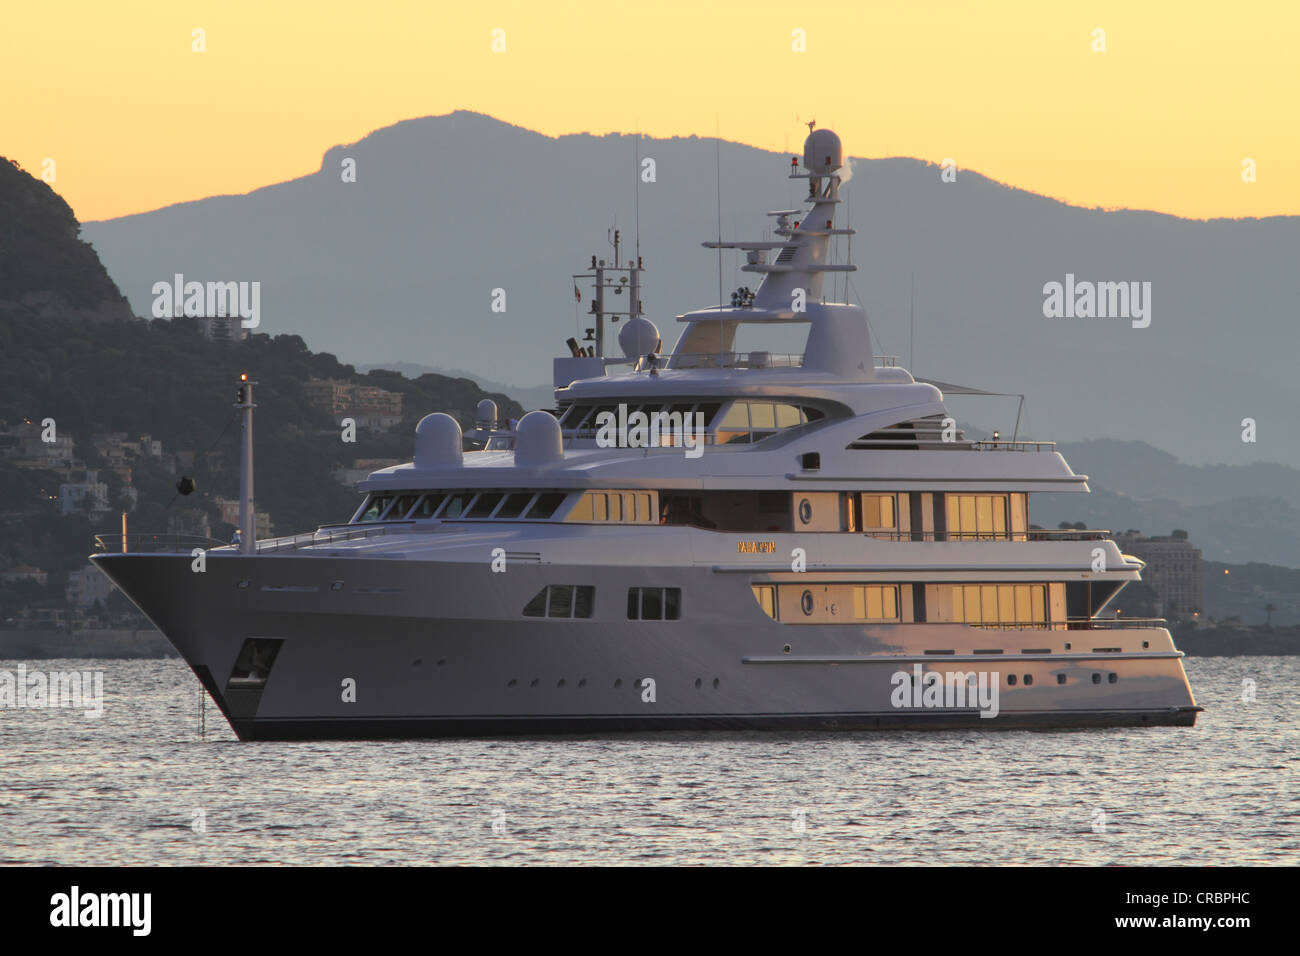 Paraffin, cruiser, built by Feadship, 60.10 m, built in 2002, French Riviera, France, Mediterranean Sea, Europe Stock Photo